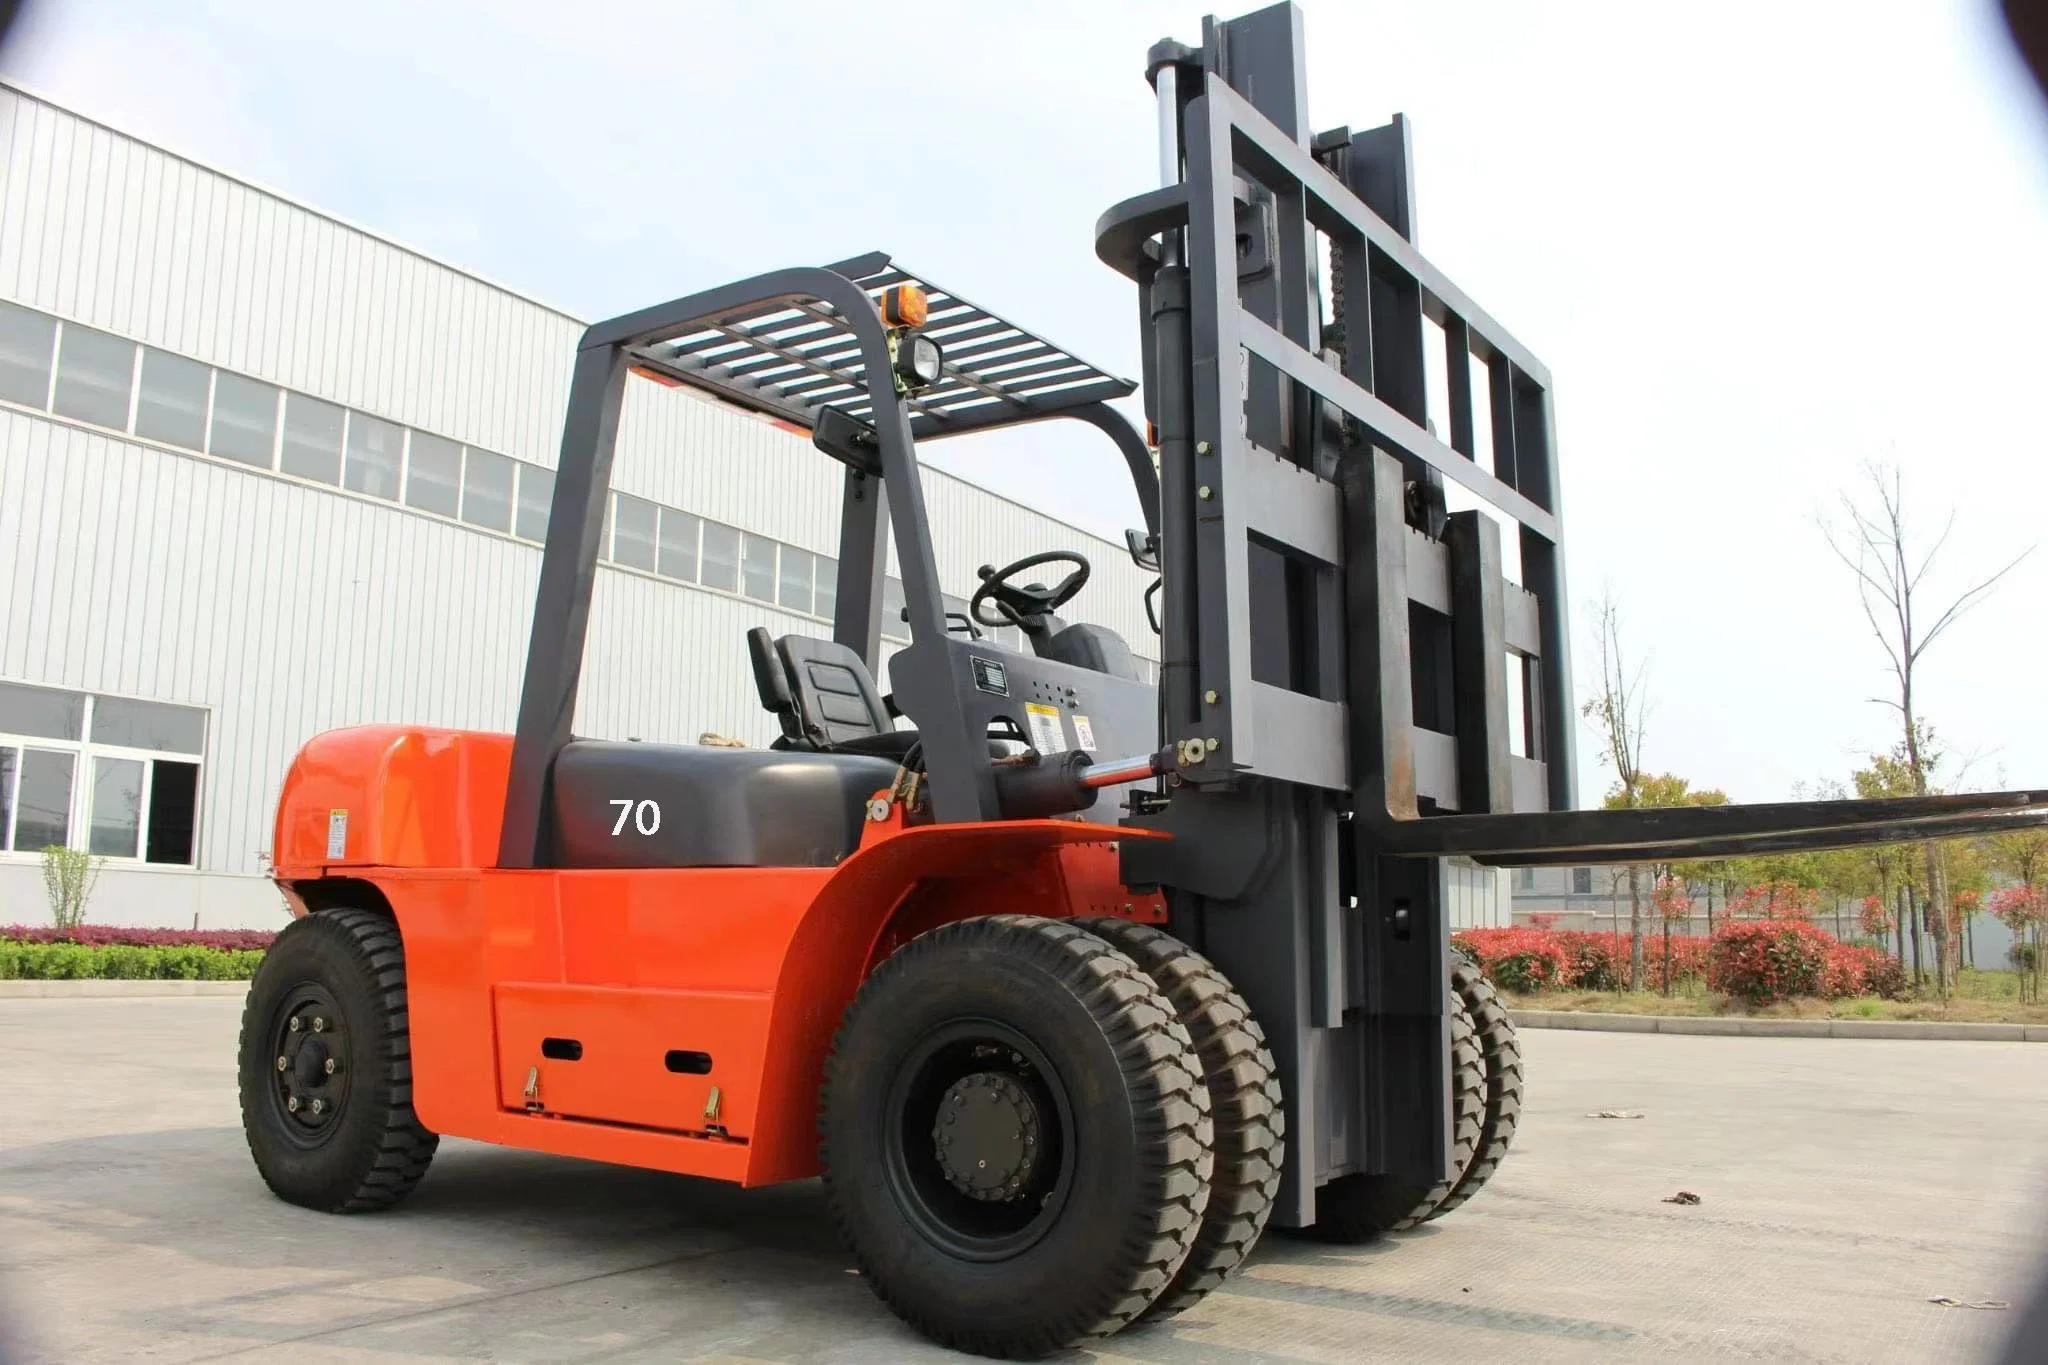 New Diesel Forklift Truck 7ton Fd70 Auto/Mannual Transmission Forklift Chinese/Japan/USA Engine Handling Equipment for Sale